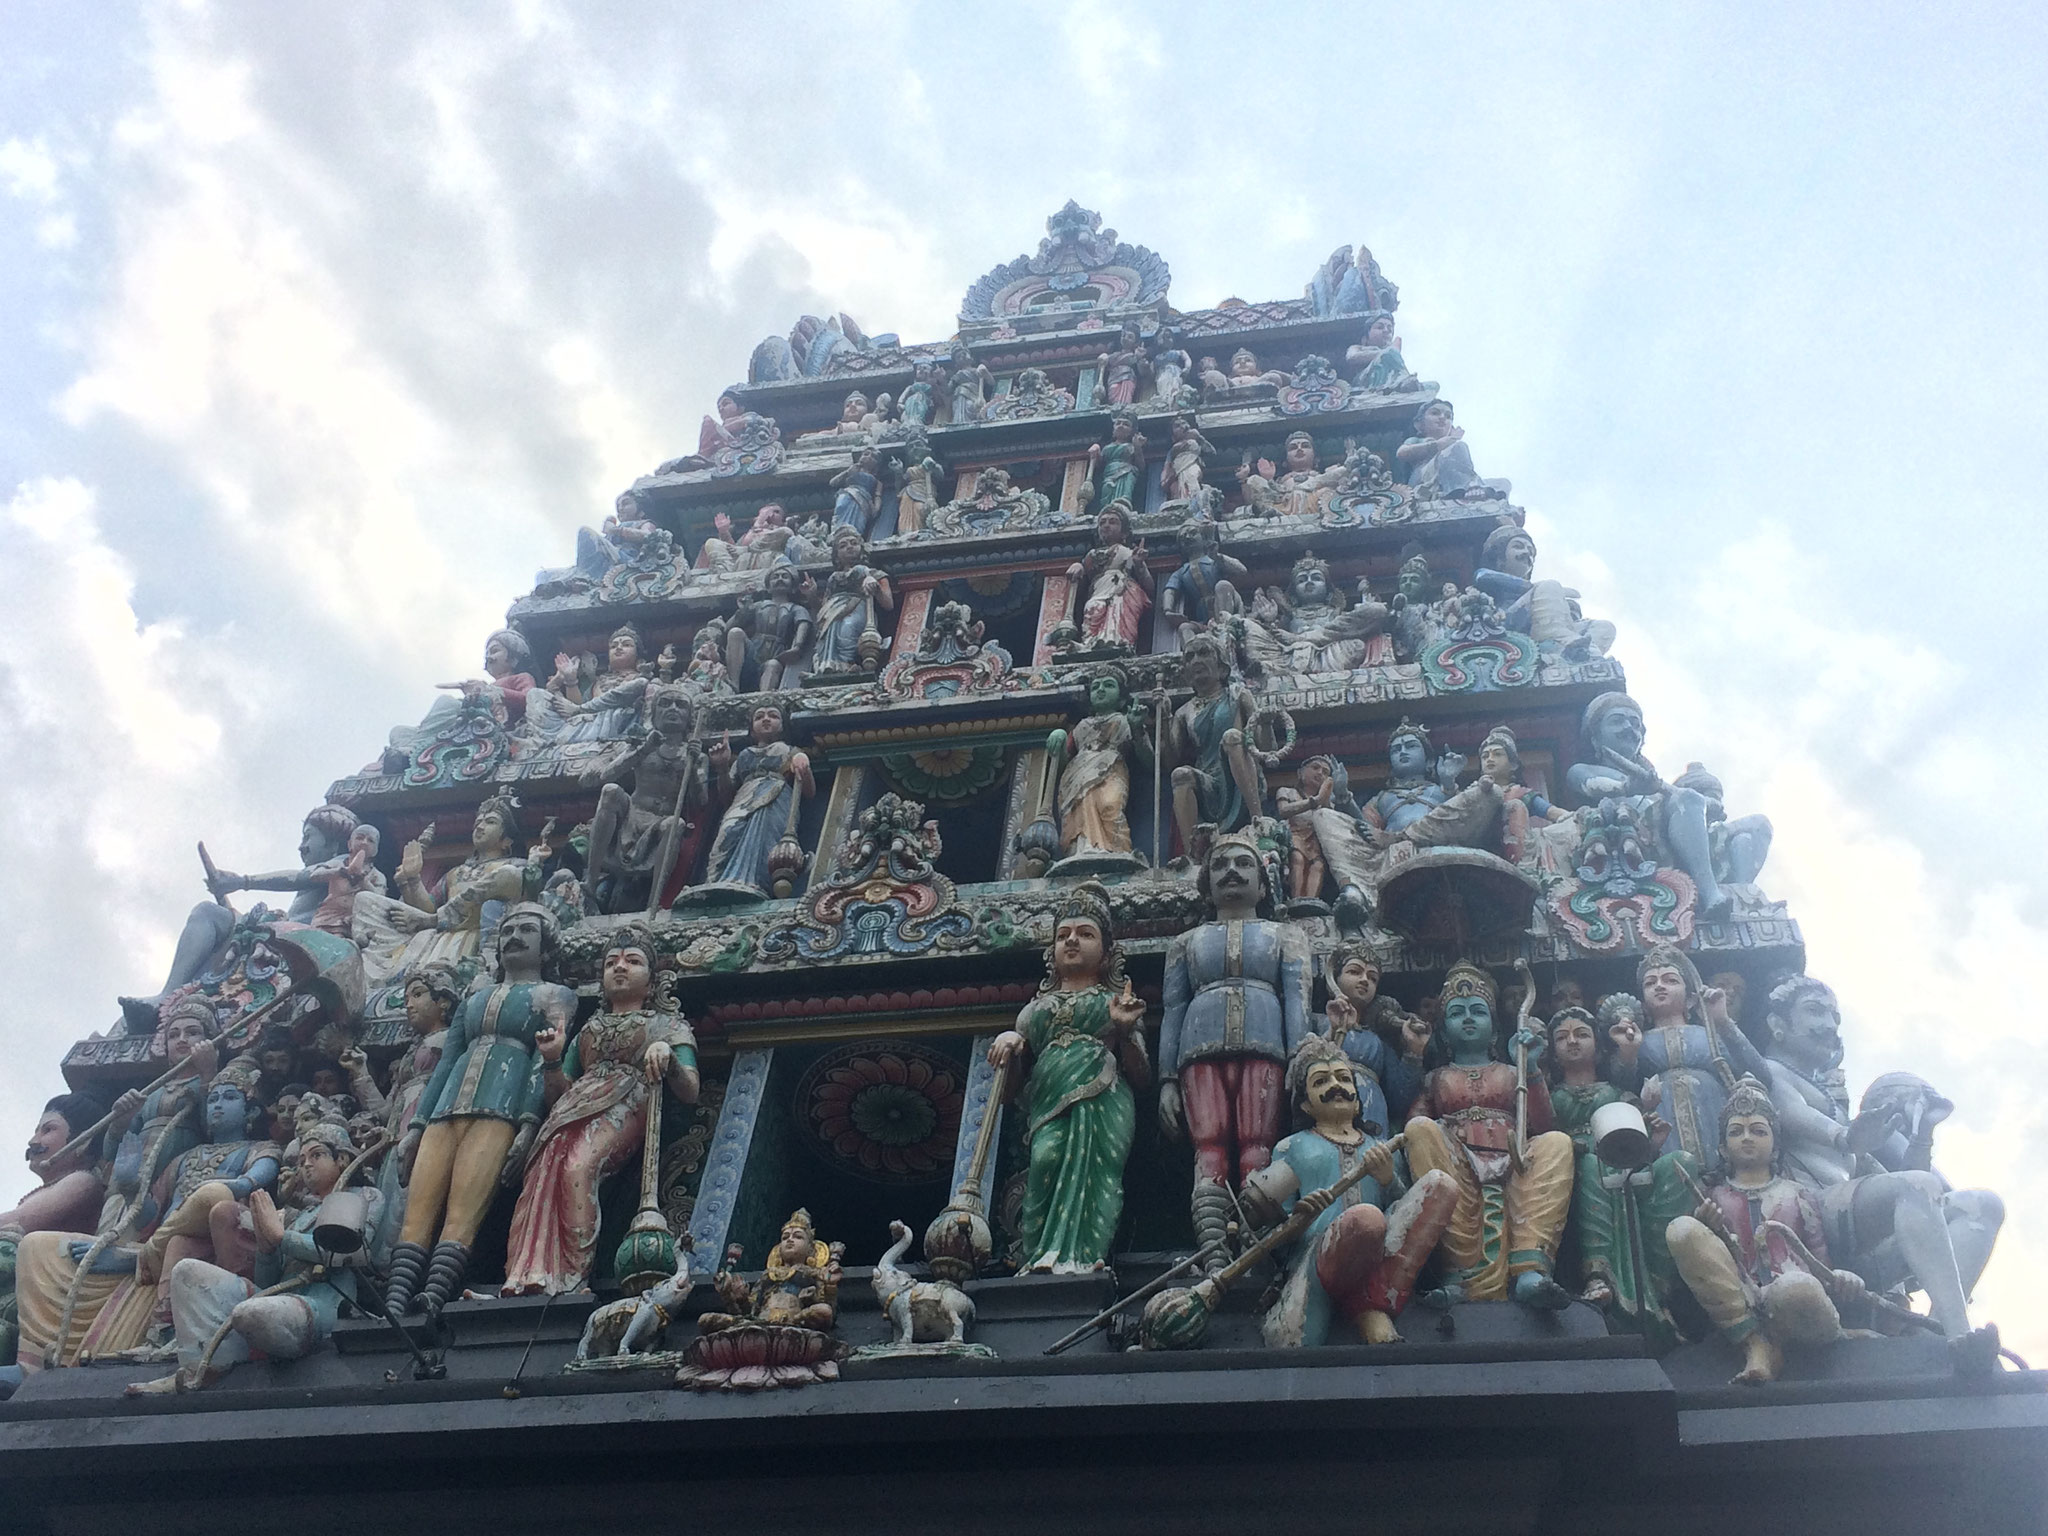 "Sri Mariamman Temple" - Hindu temple are just so different from Buddhist ones (as you can probably already see...)